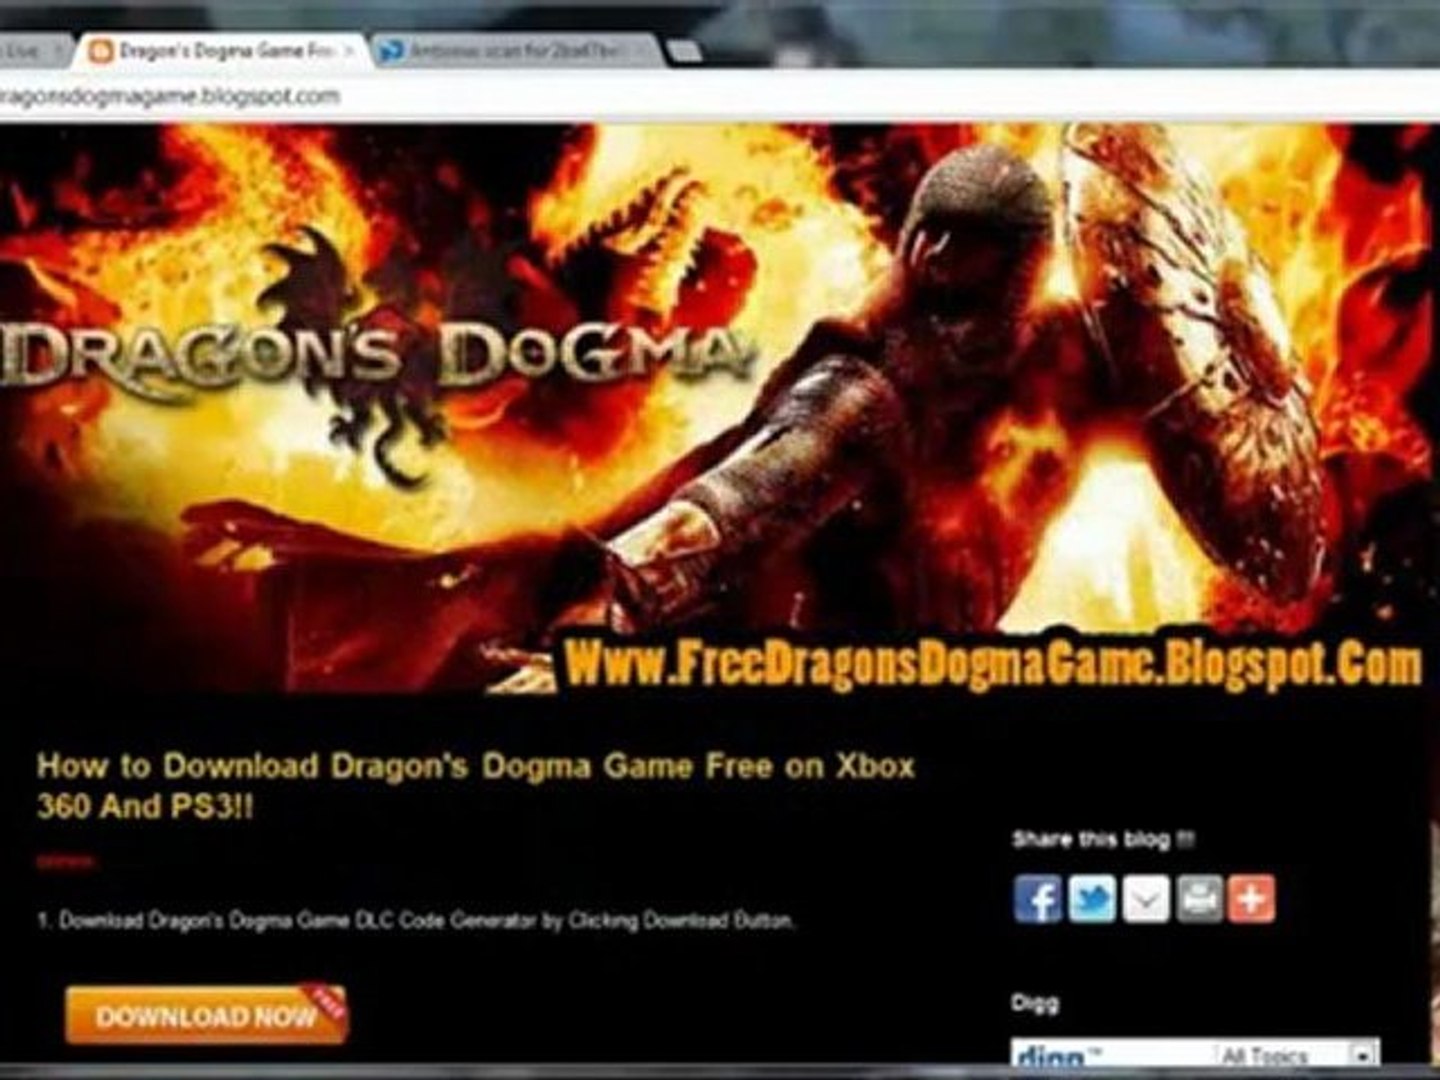 Mededogen bouw ik heb dorst How to Install Dragon's Dogma Game Free on Xbox 360 And PS3 - video  Dailymotion